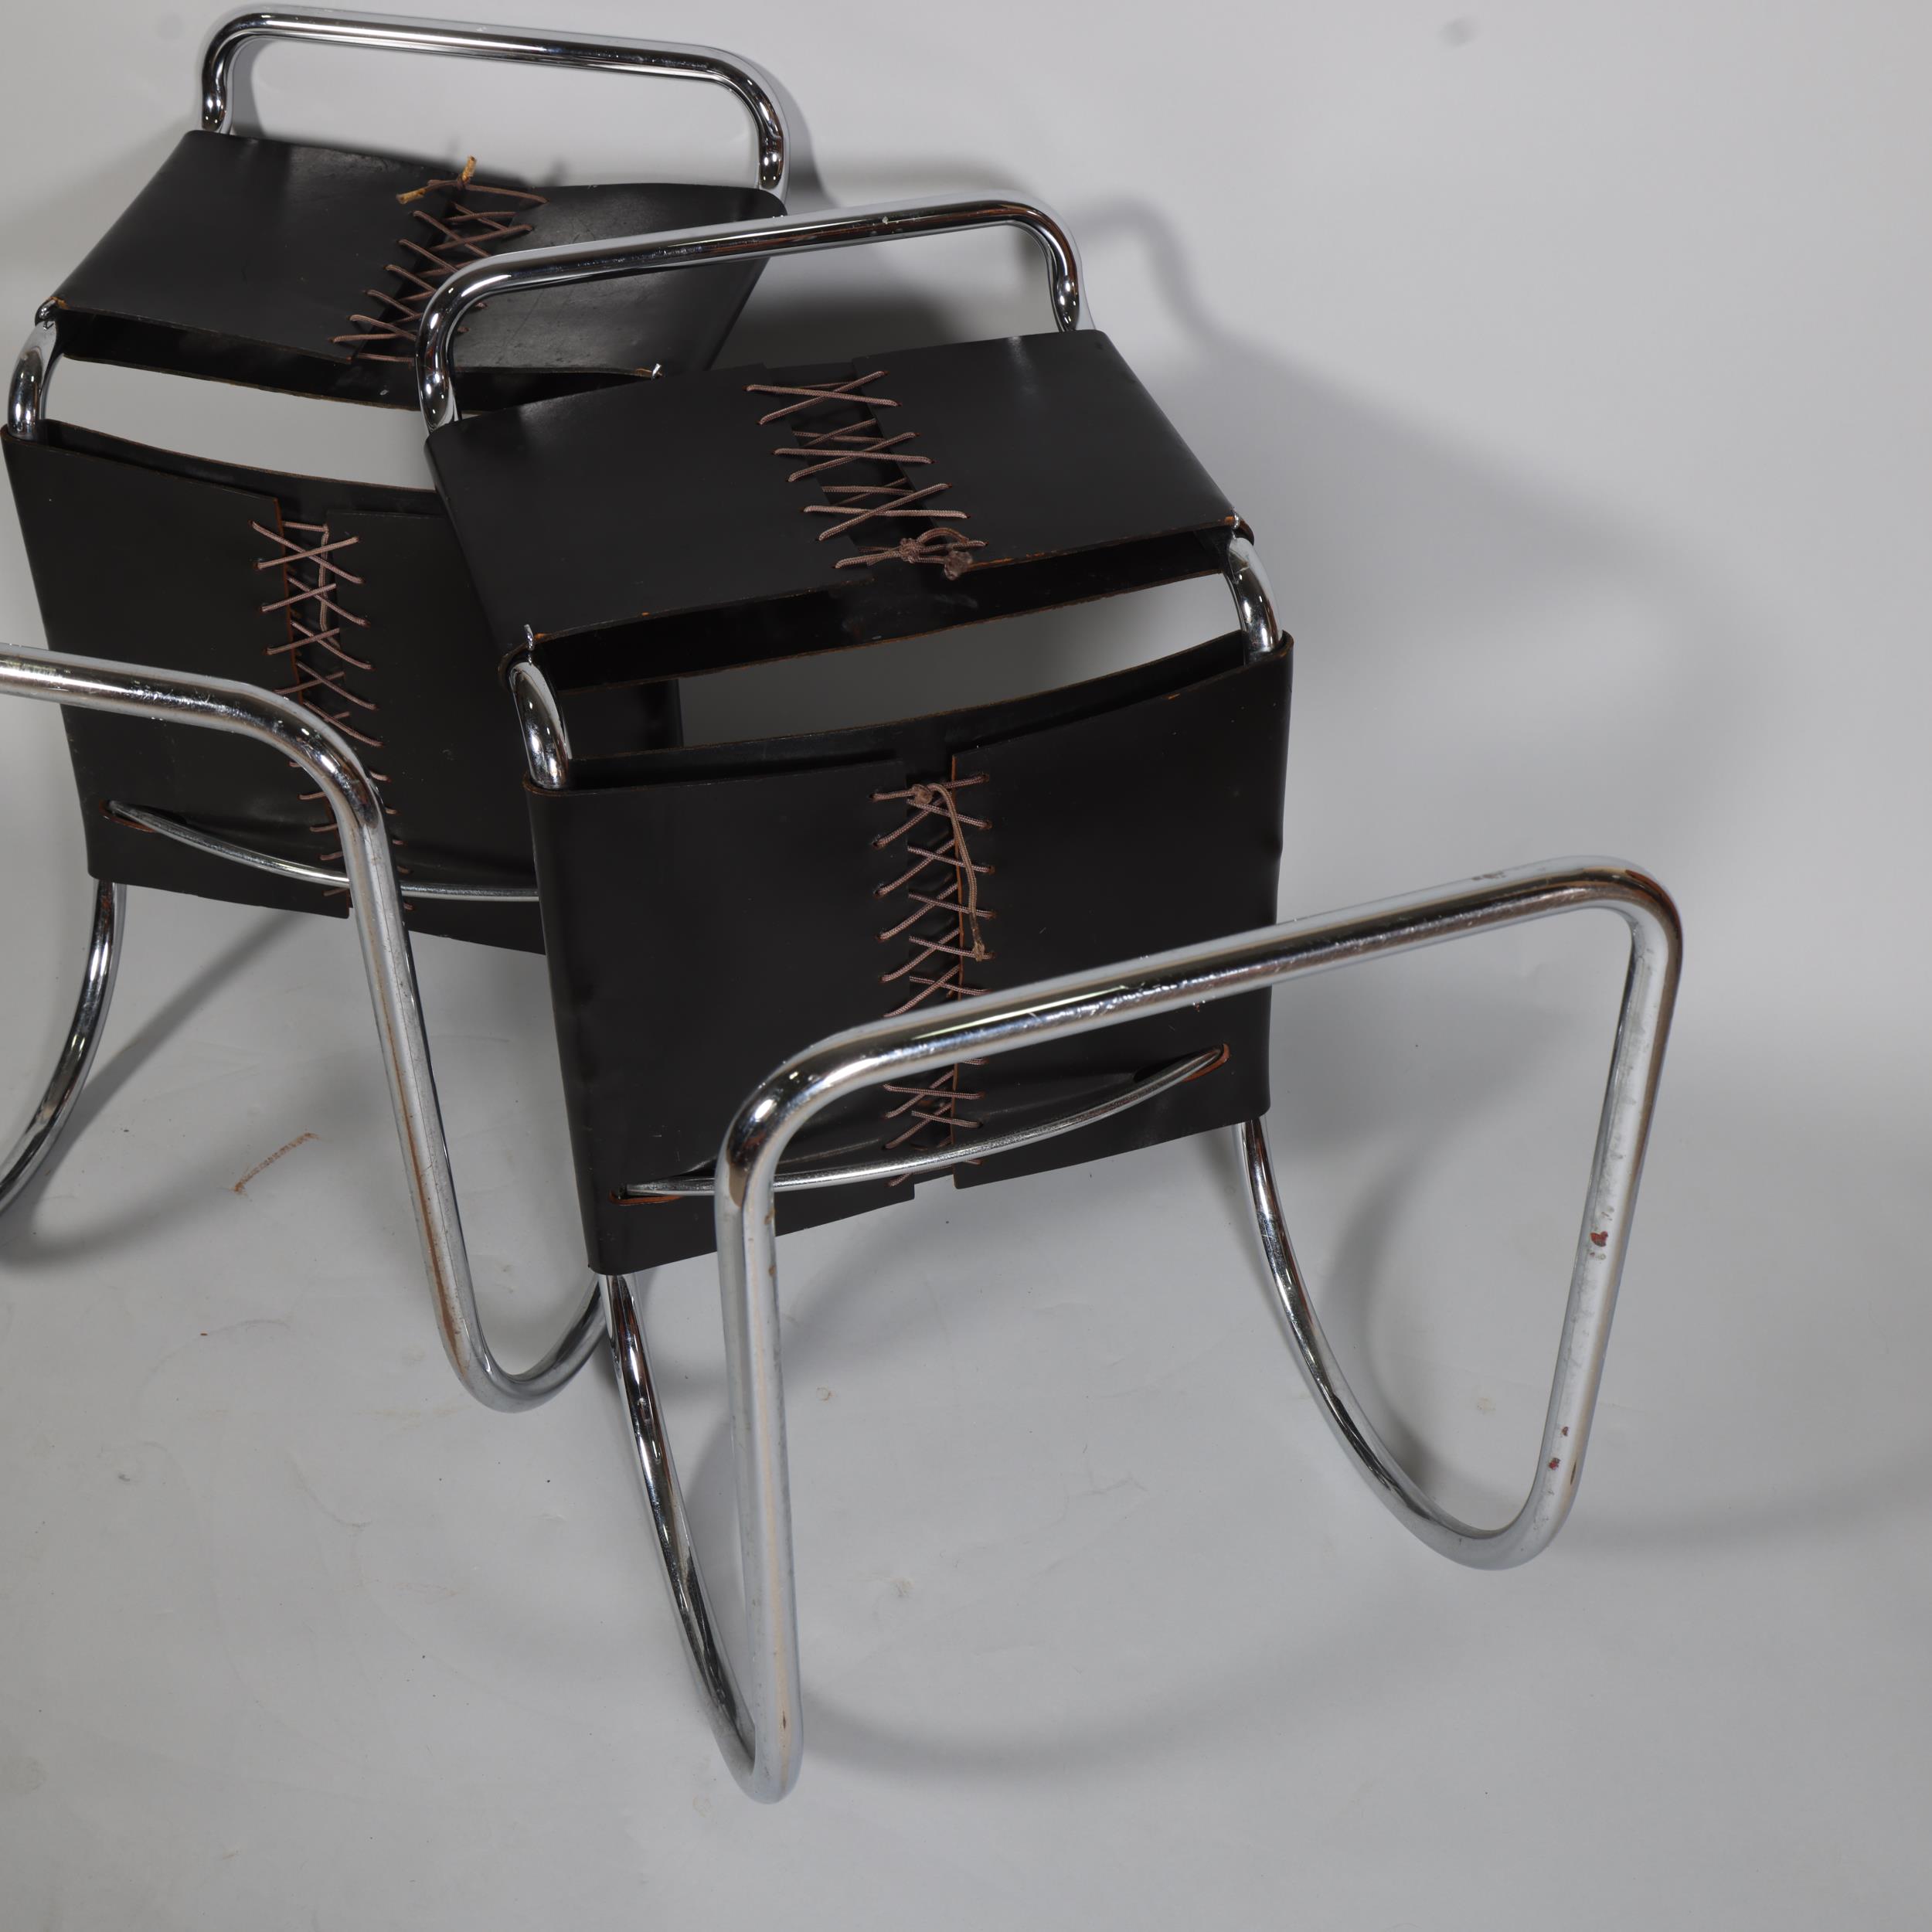 MIES VAN DER ROHE for KNOLL - an early pair of MR10 cantilever tubular steel side chairs with - Image 5 of 5